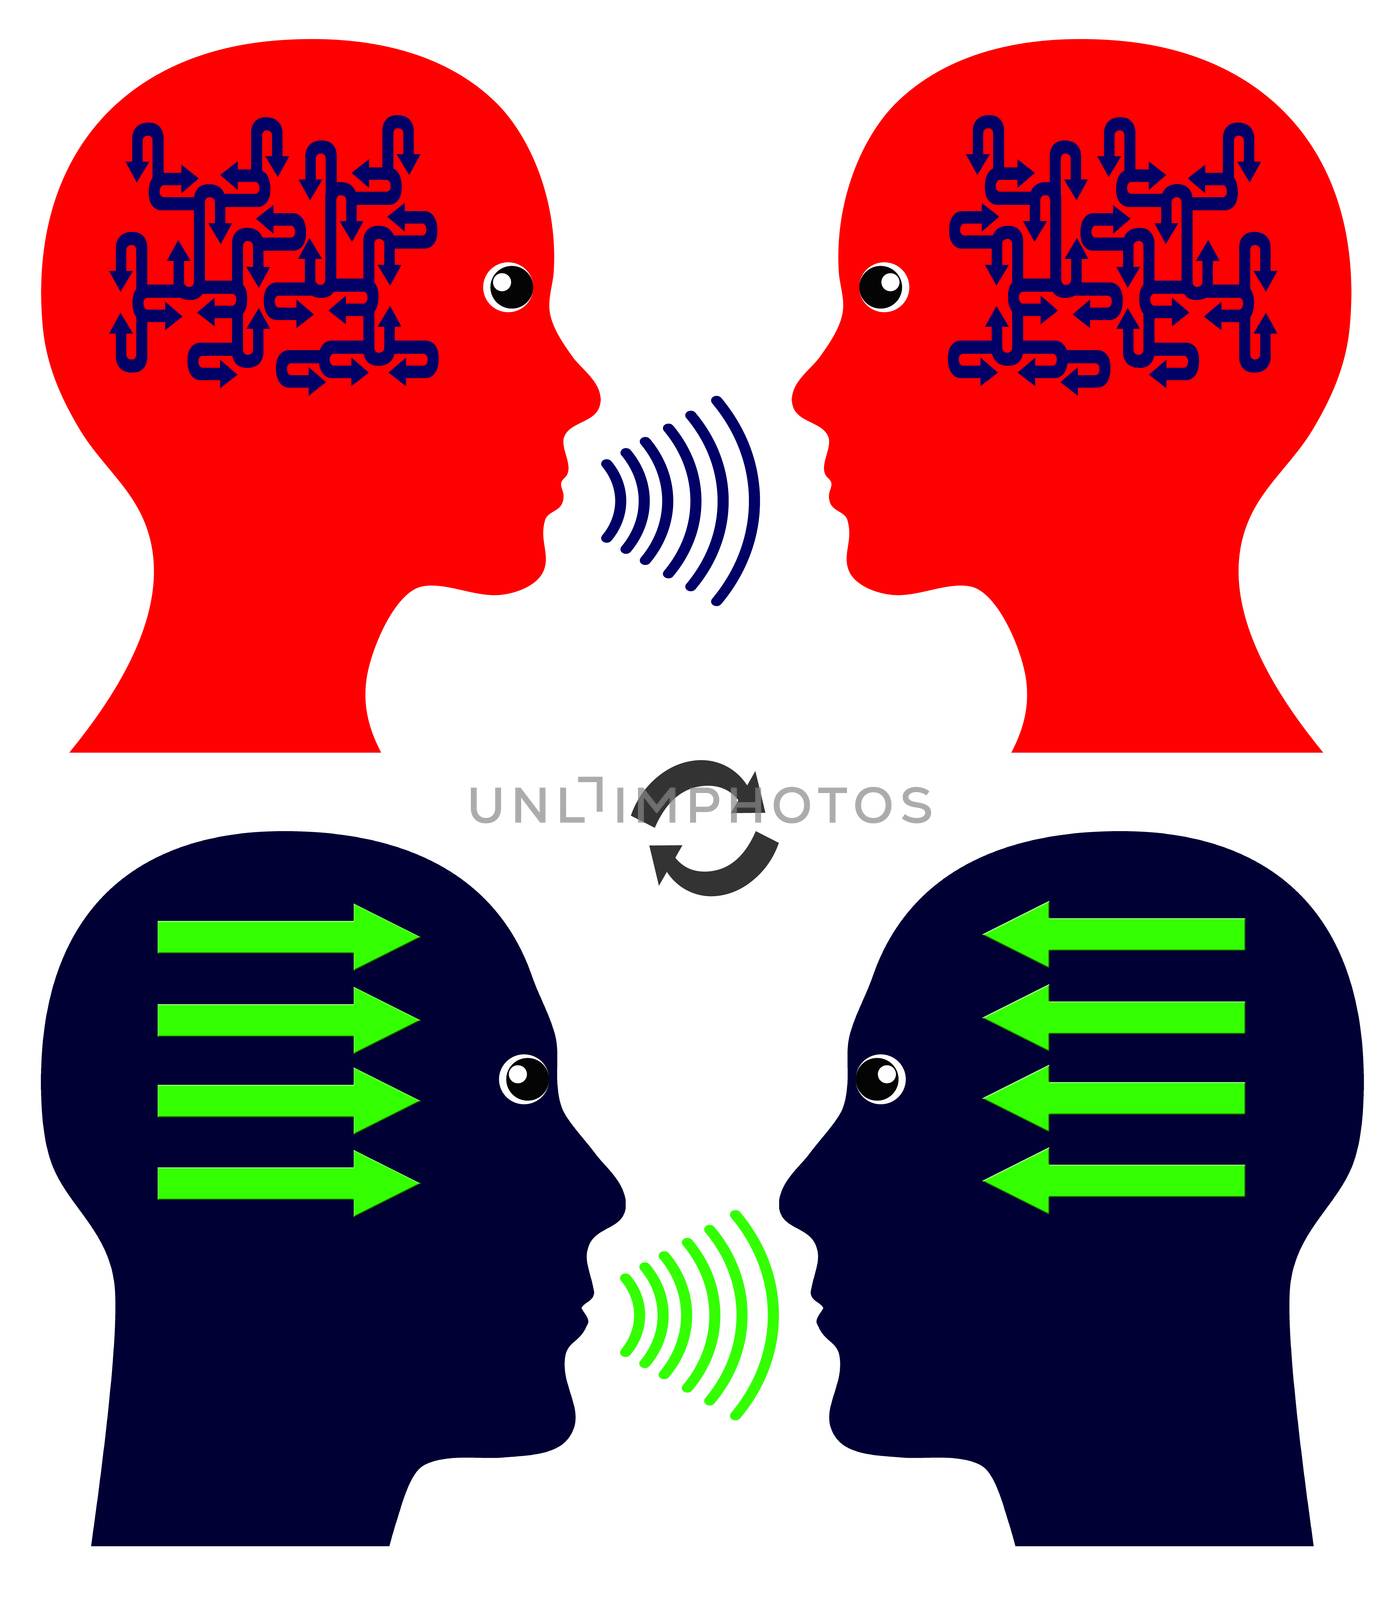 Men and women talking among themselves follow different communication pattern